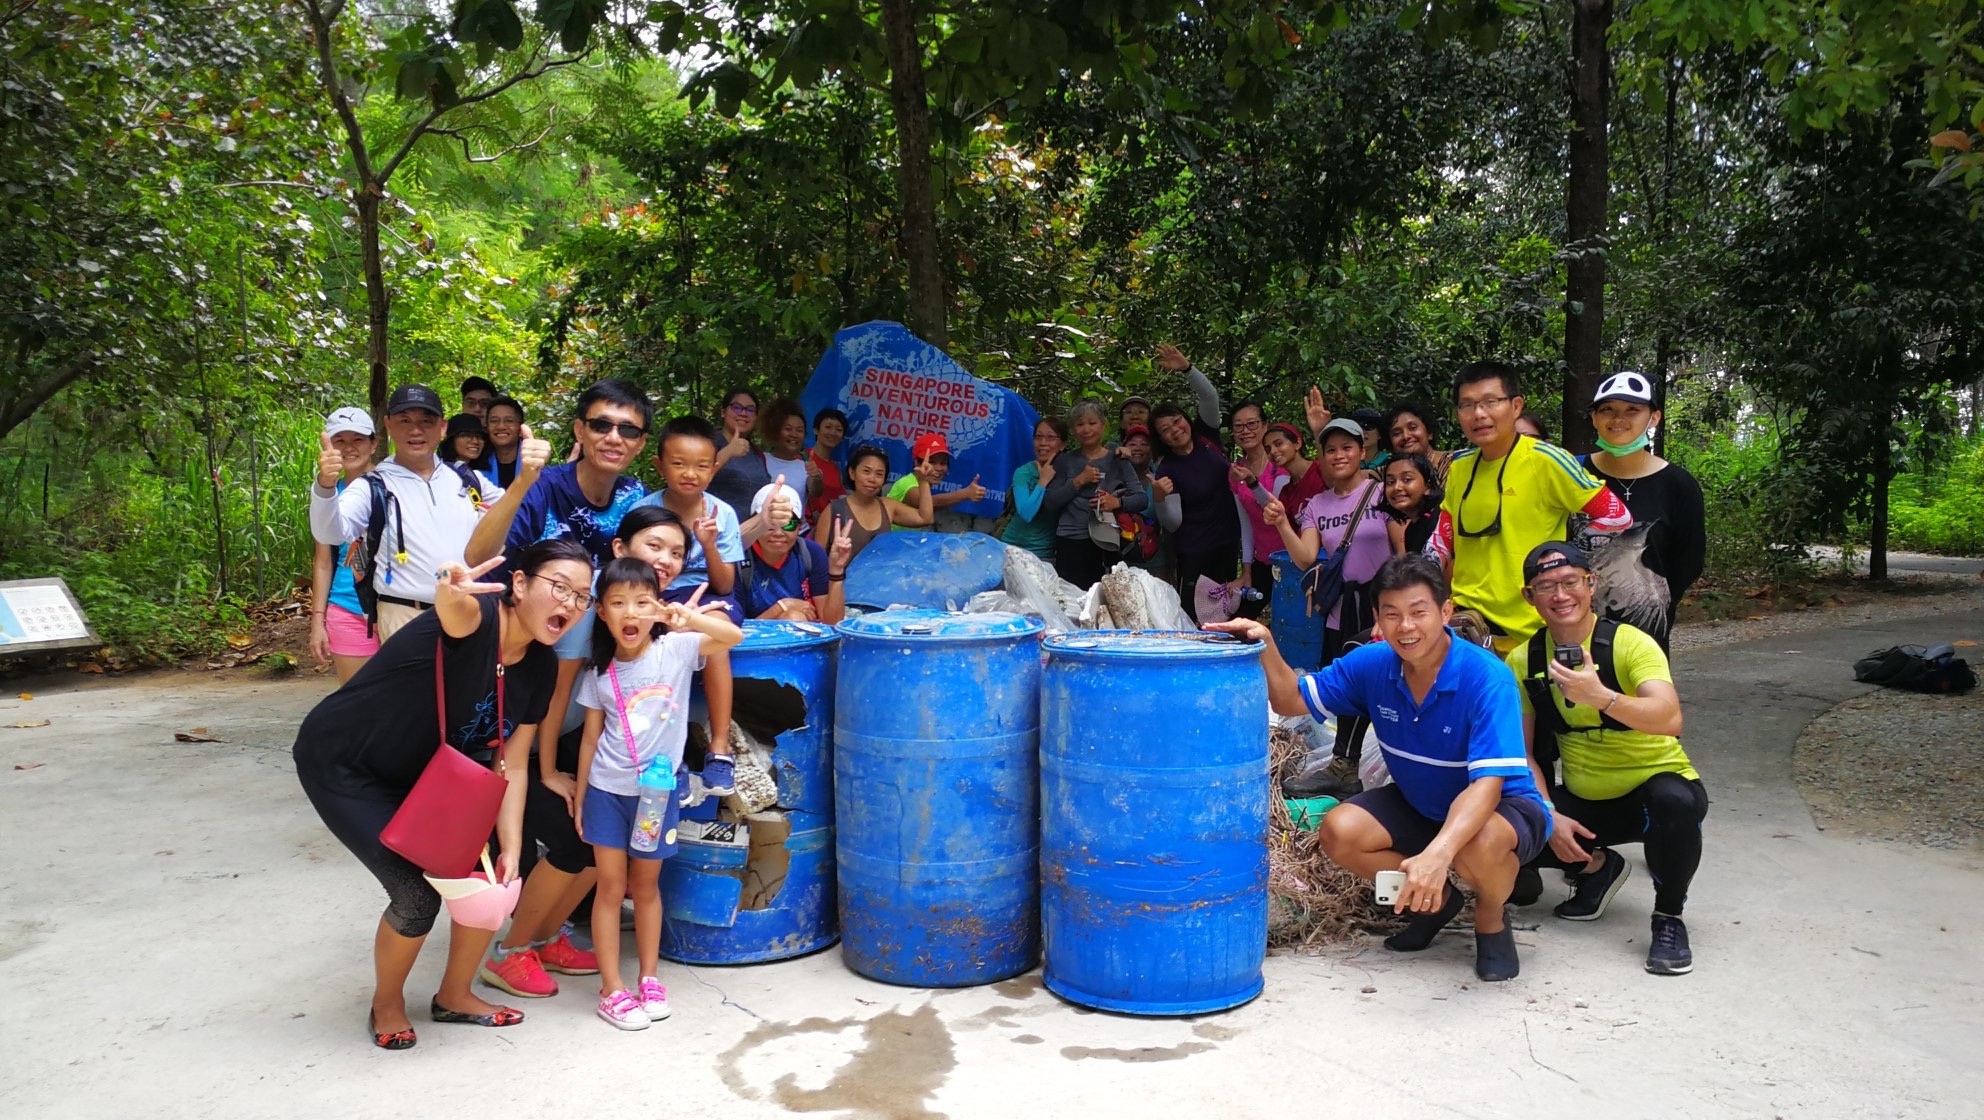 We collected 420kg of trash | Save the Seas: Coastal Clean Up at Coney Island, Singapore